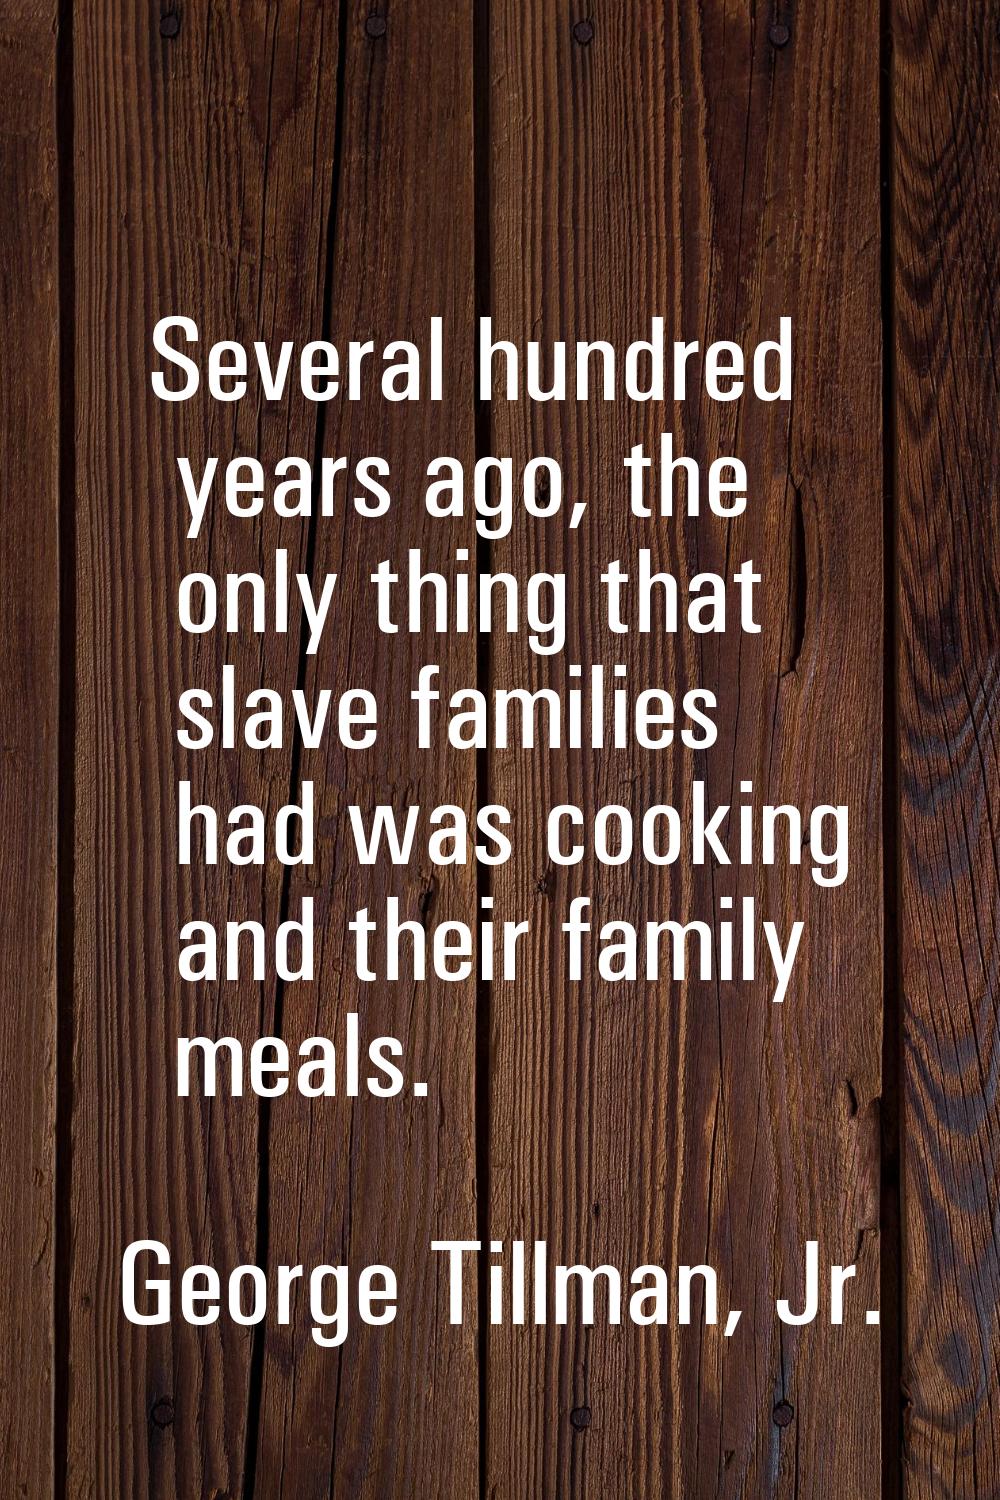 Several hundred years ago, the only thing that slave families had was cooking and their family meal